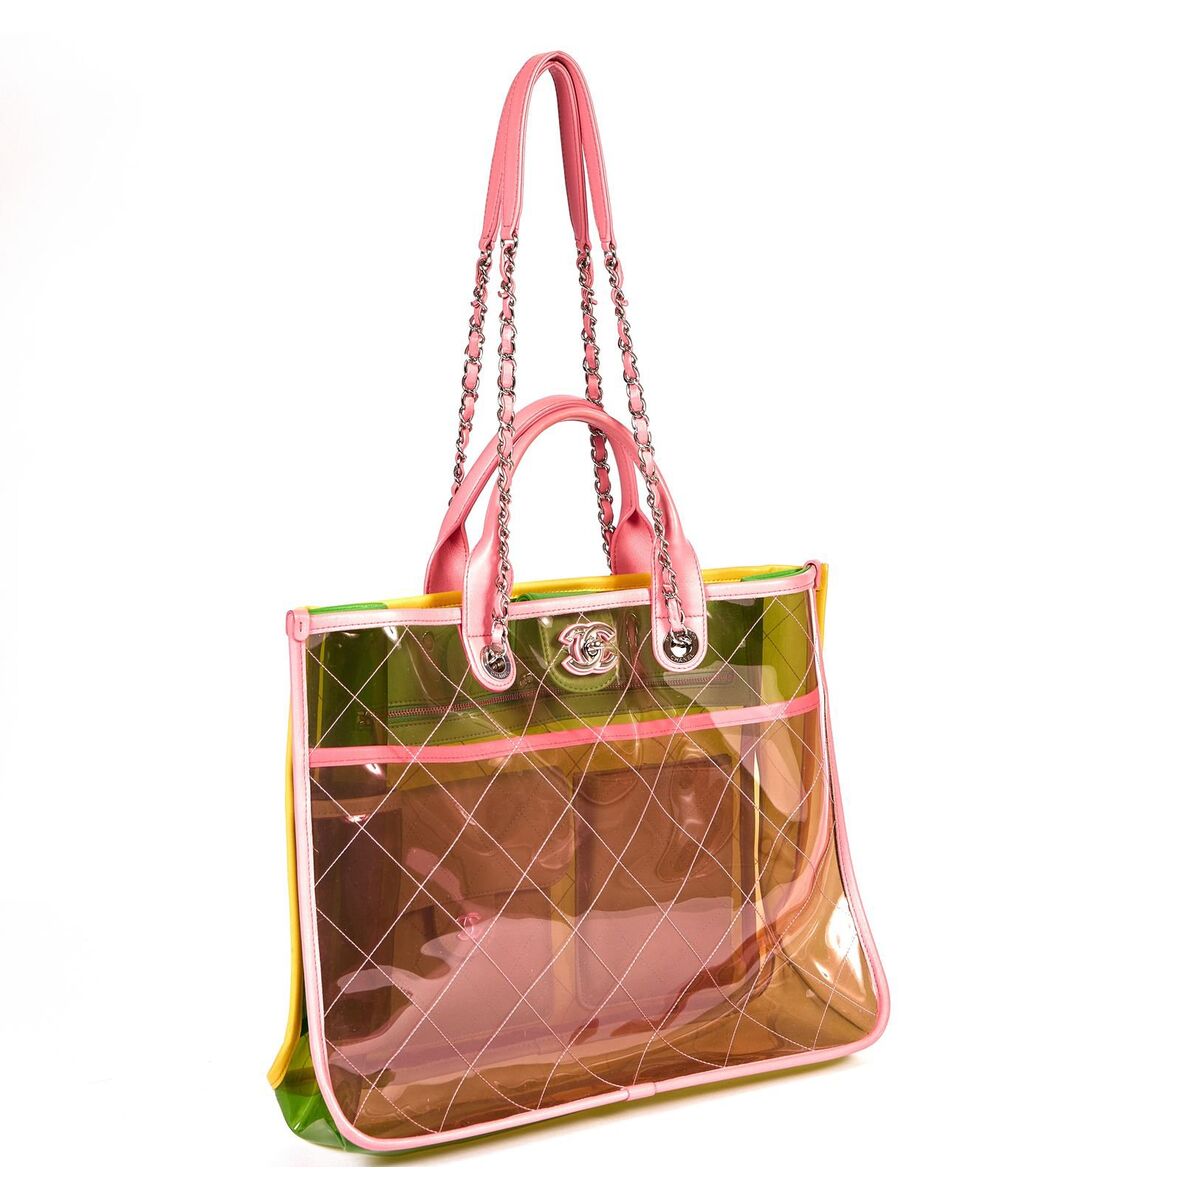 Chanel Transparent Coco Colorful Bag - Vintage Lux - Green